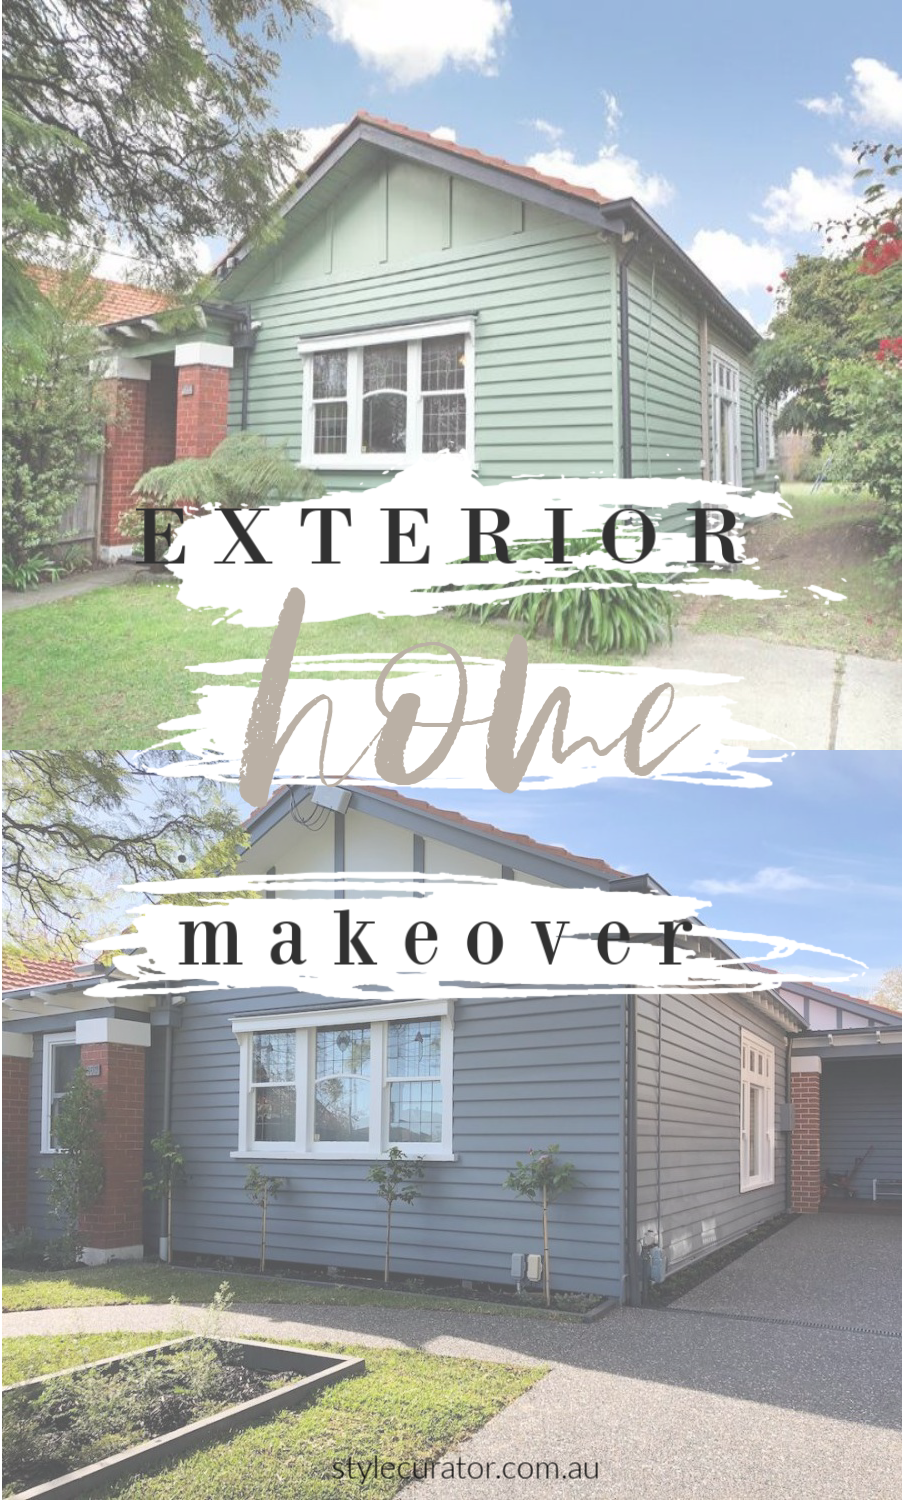 House before and after external makeover